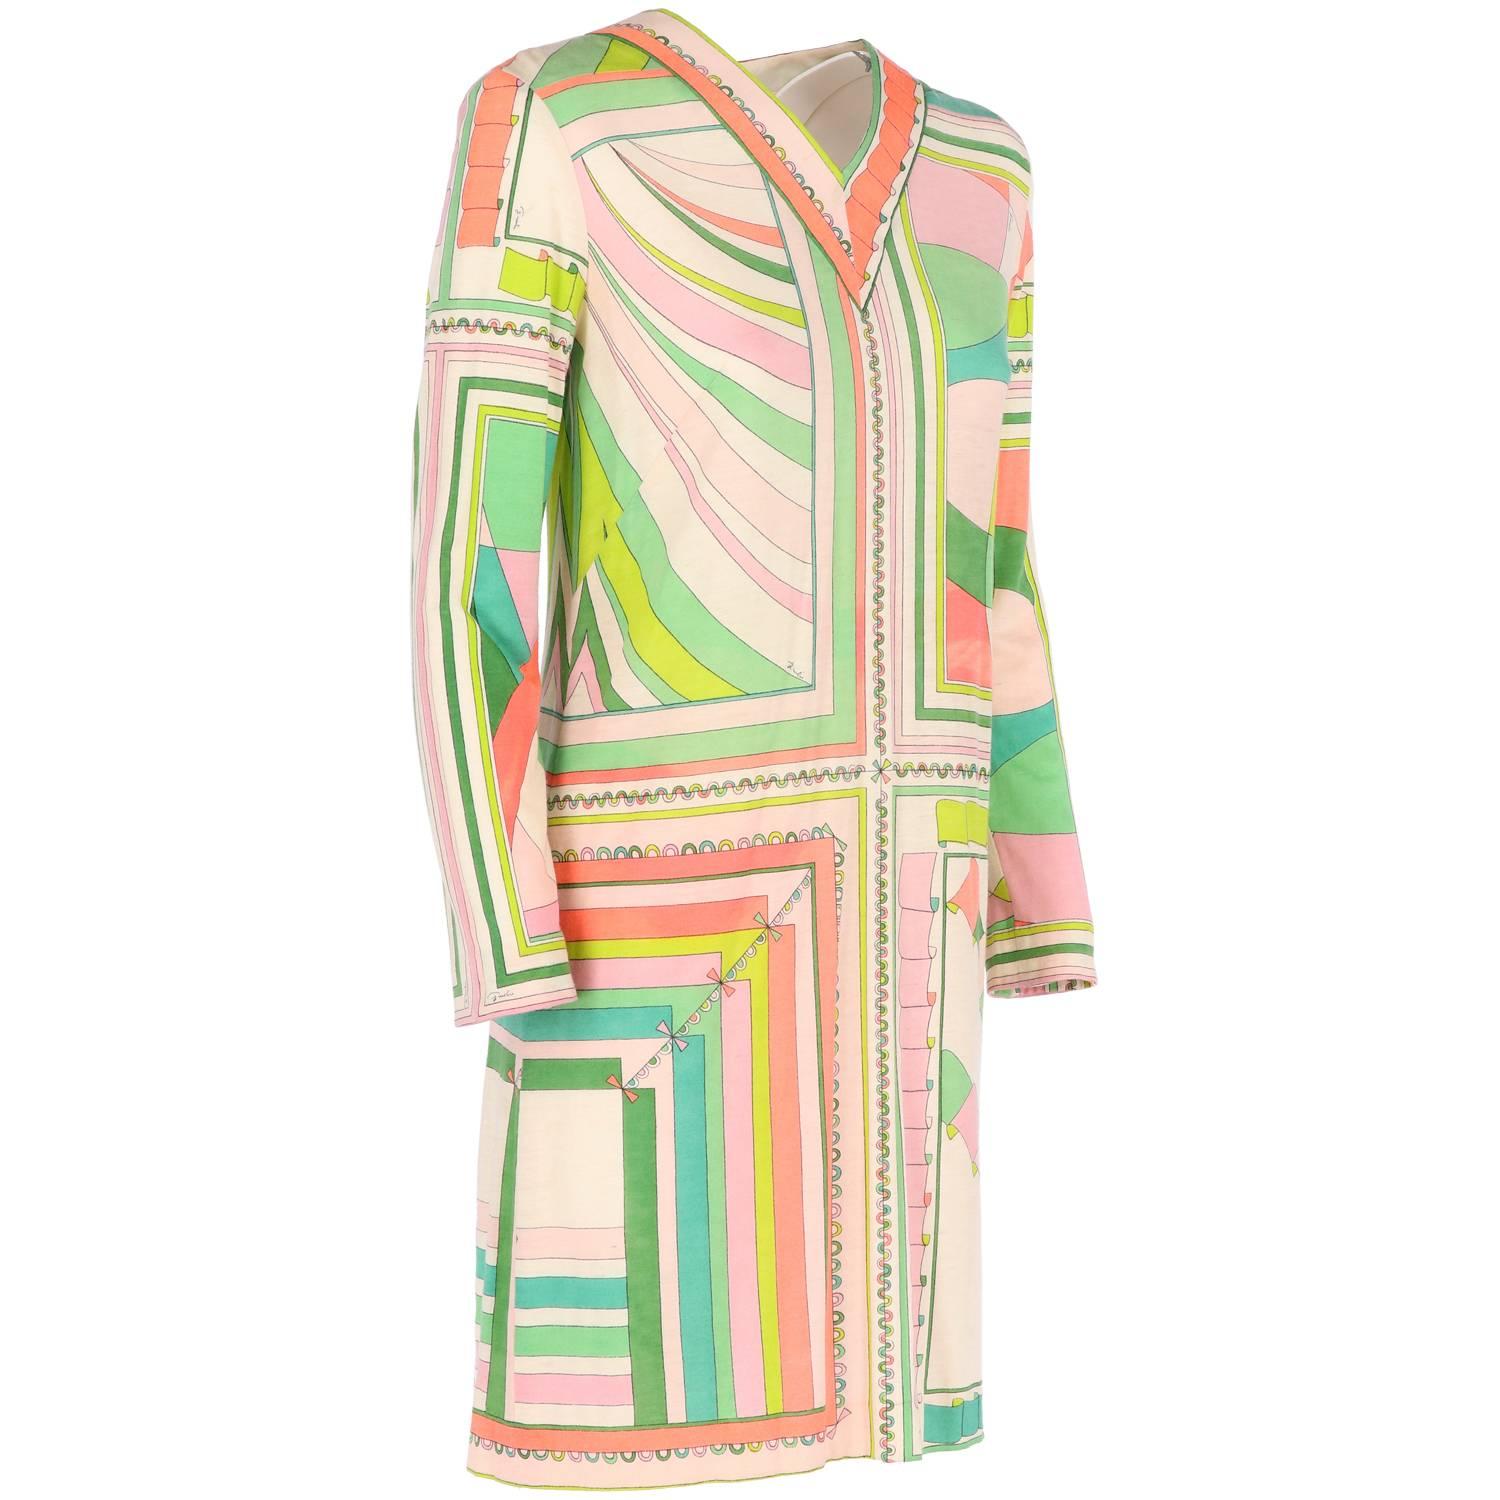 Adorable Emilio Pucci vintage dress with a lovely pastel geometric pattern showing its 1960s vibes.
Please note this item is vintage, thus it may show minor imperfections, like minor marks and discolorations, all shown in pictures.

Size: 38